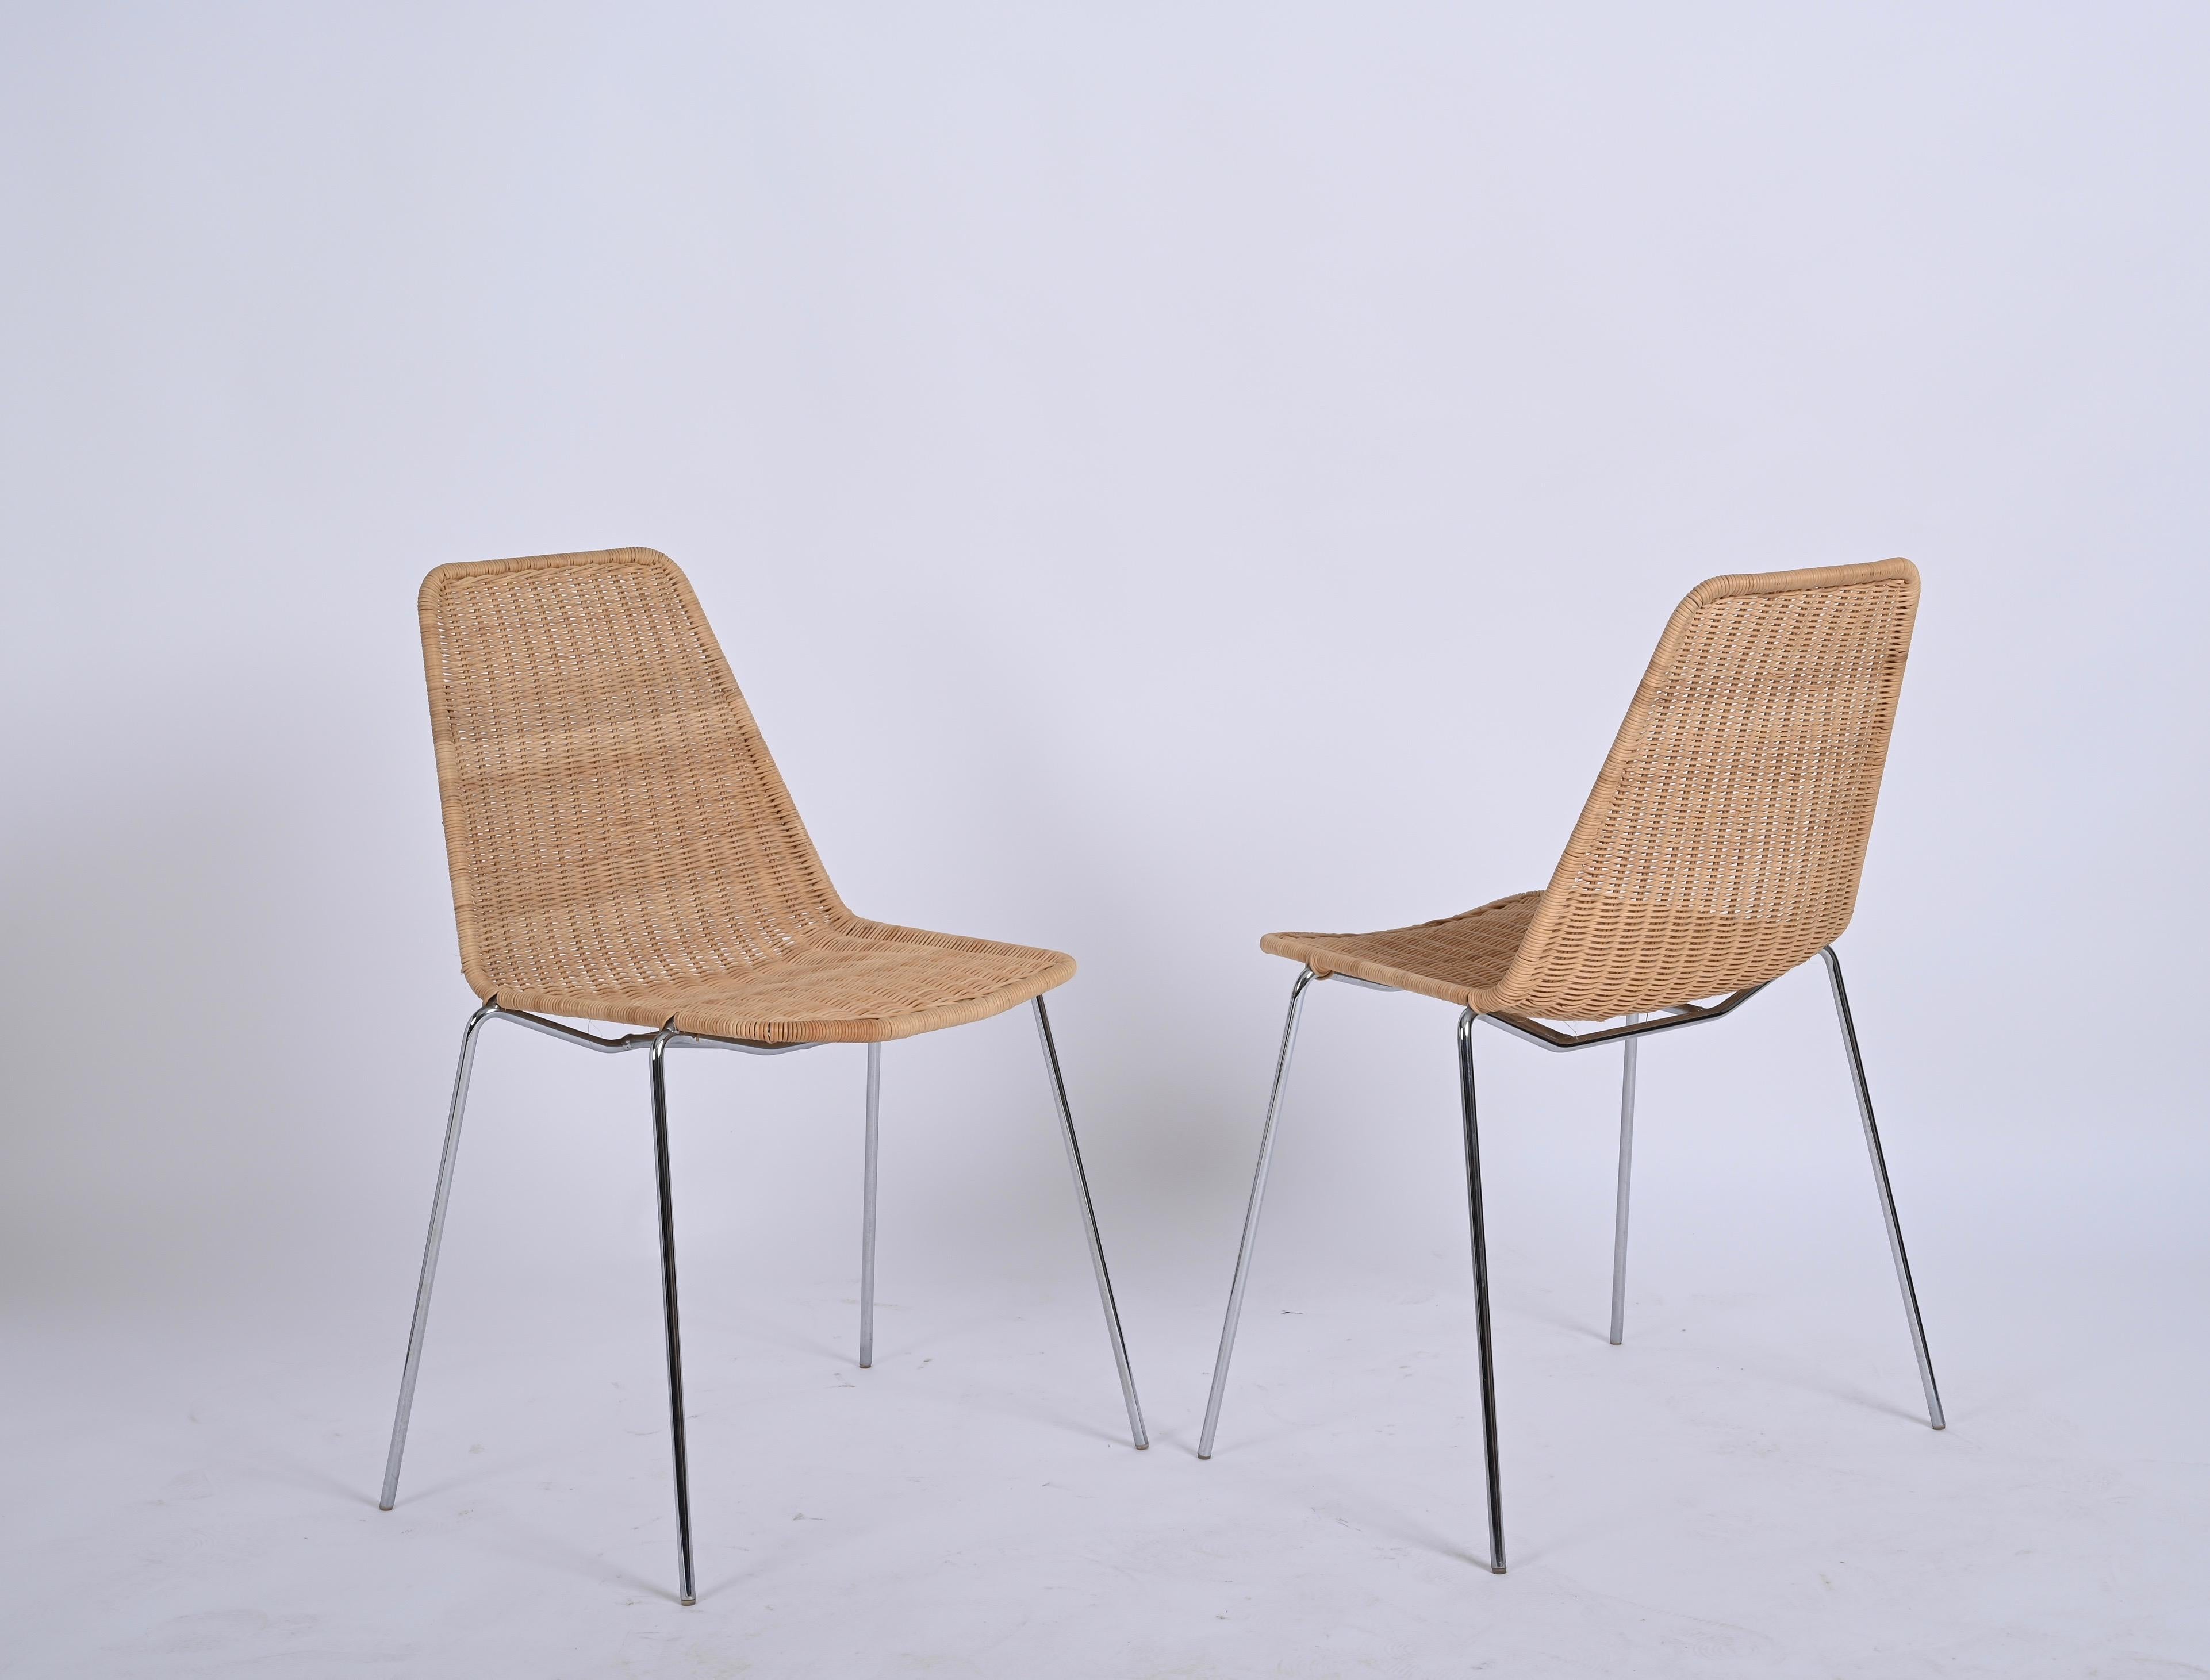 Mid-Century Set of 4 Chromed Metal, Rattan Italian Chairs, Campo & Graffi 1970s For Sale 4